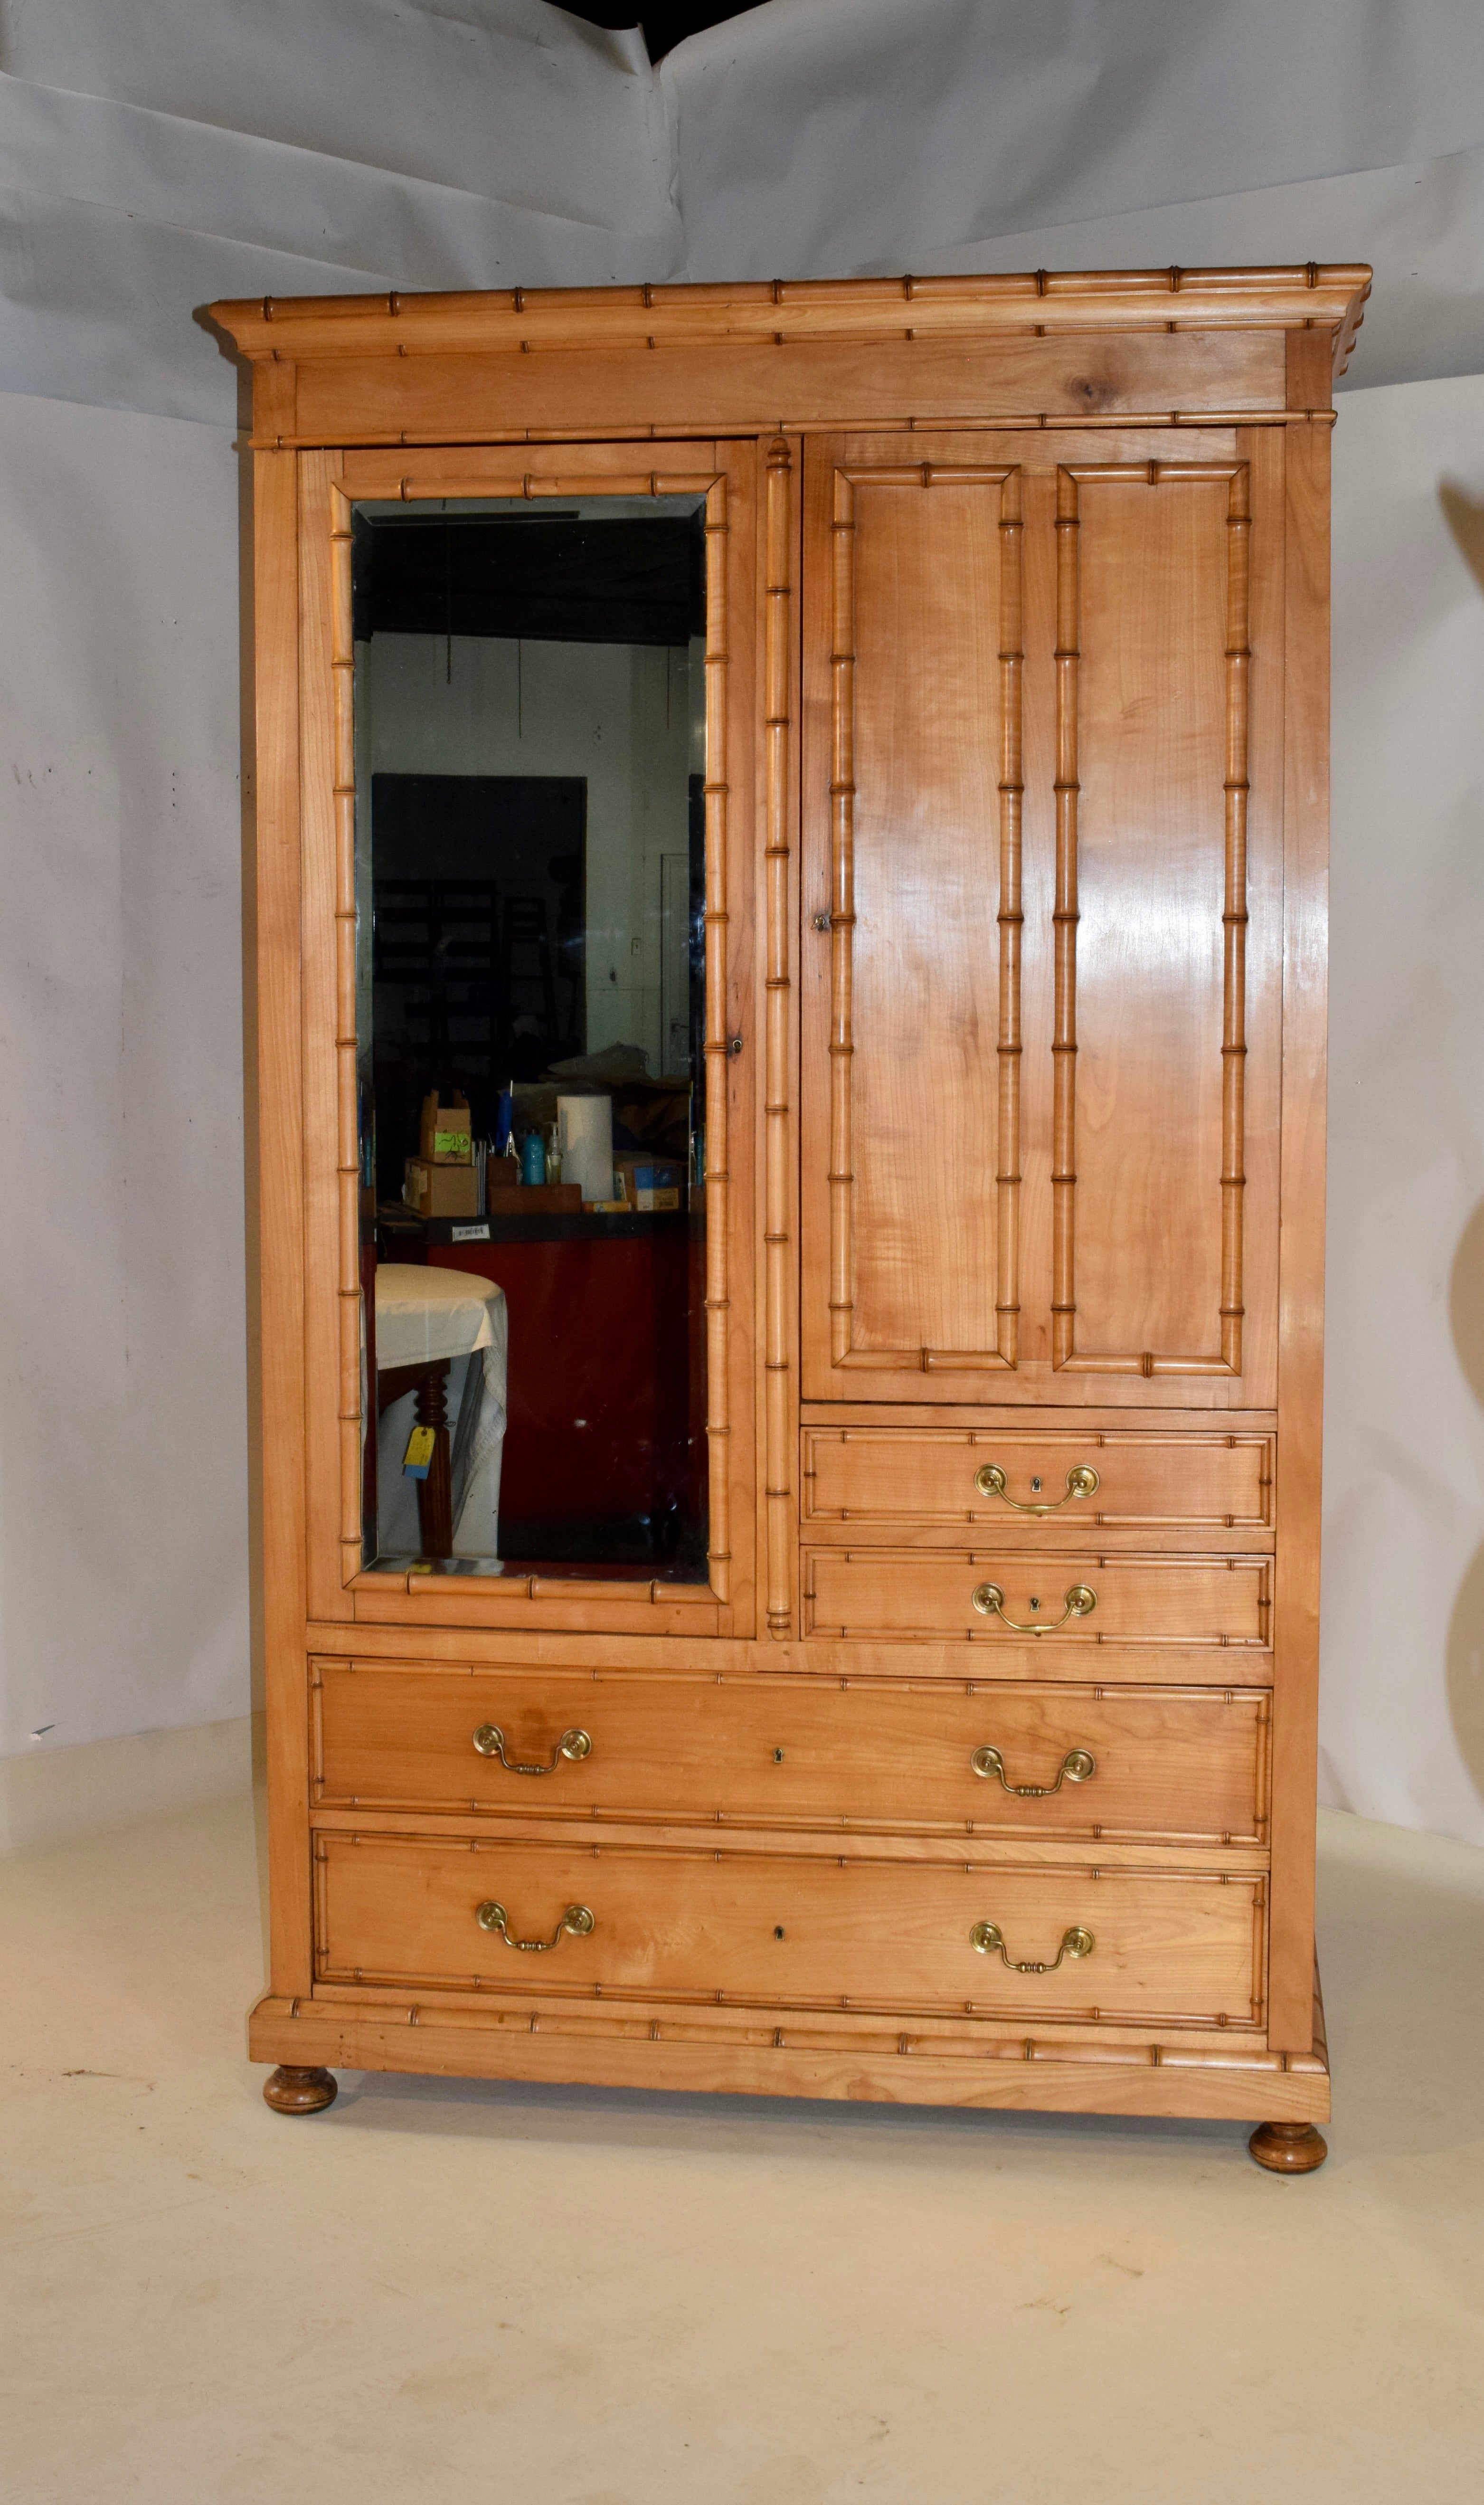 19th century French cherry armoire with faux bamboo details. the crown has faux bamboo moldings over a single mirrored door on the left, which opens to reveal a bar for hanging clothing and a single door on the right, which opens to reveal shelving.